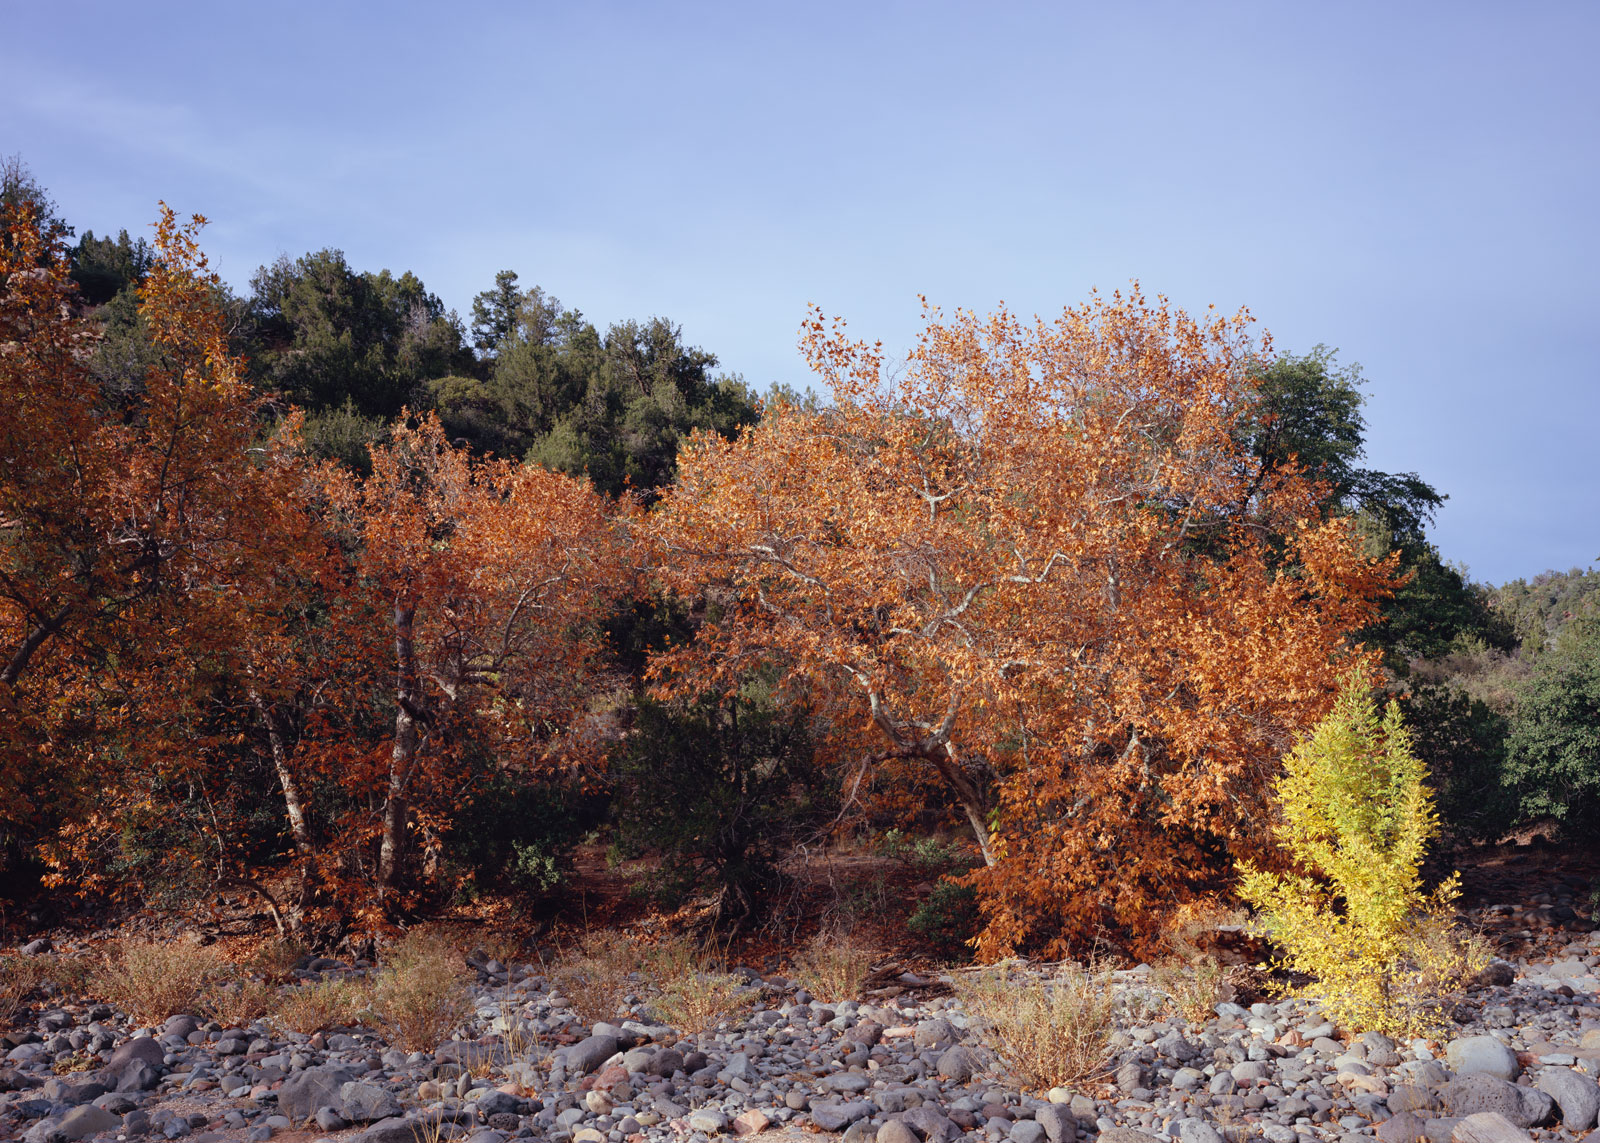 Fall leaves on the Sycamores, with a yellow bush in the right foreground, at Grasshopper Point north of Sedona